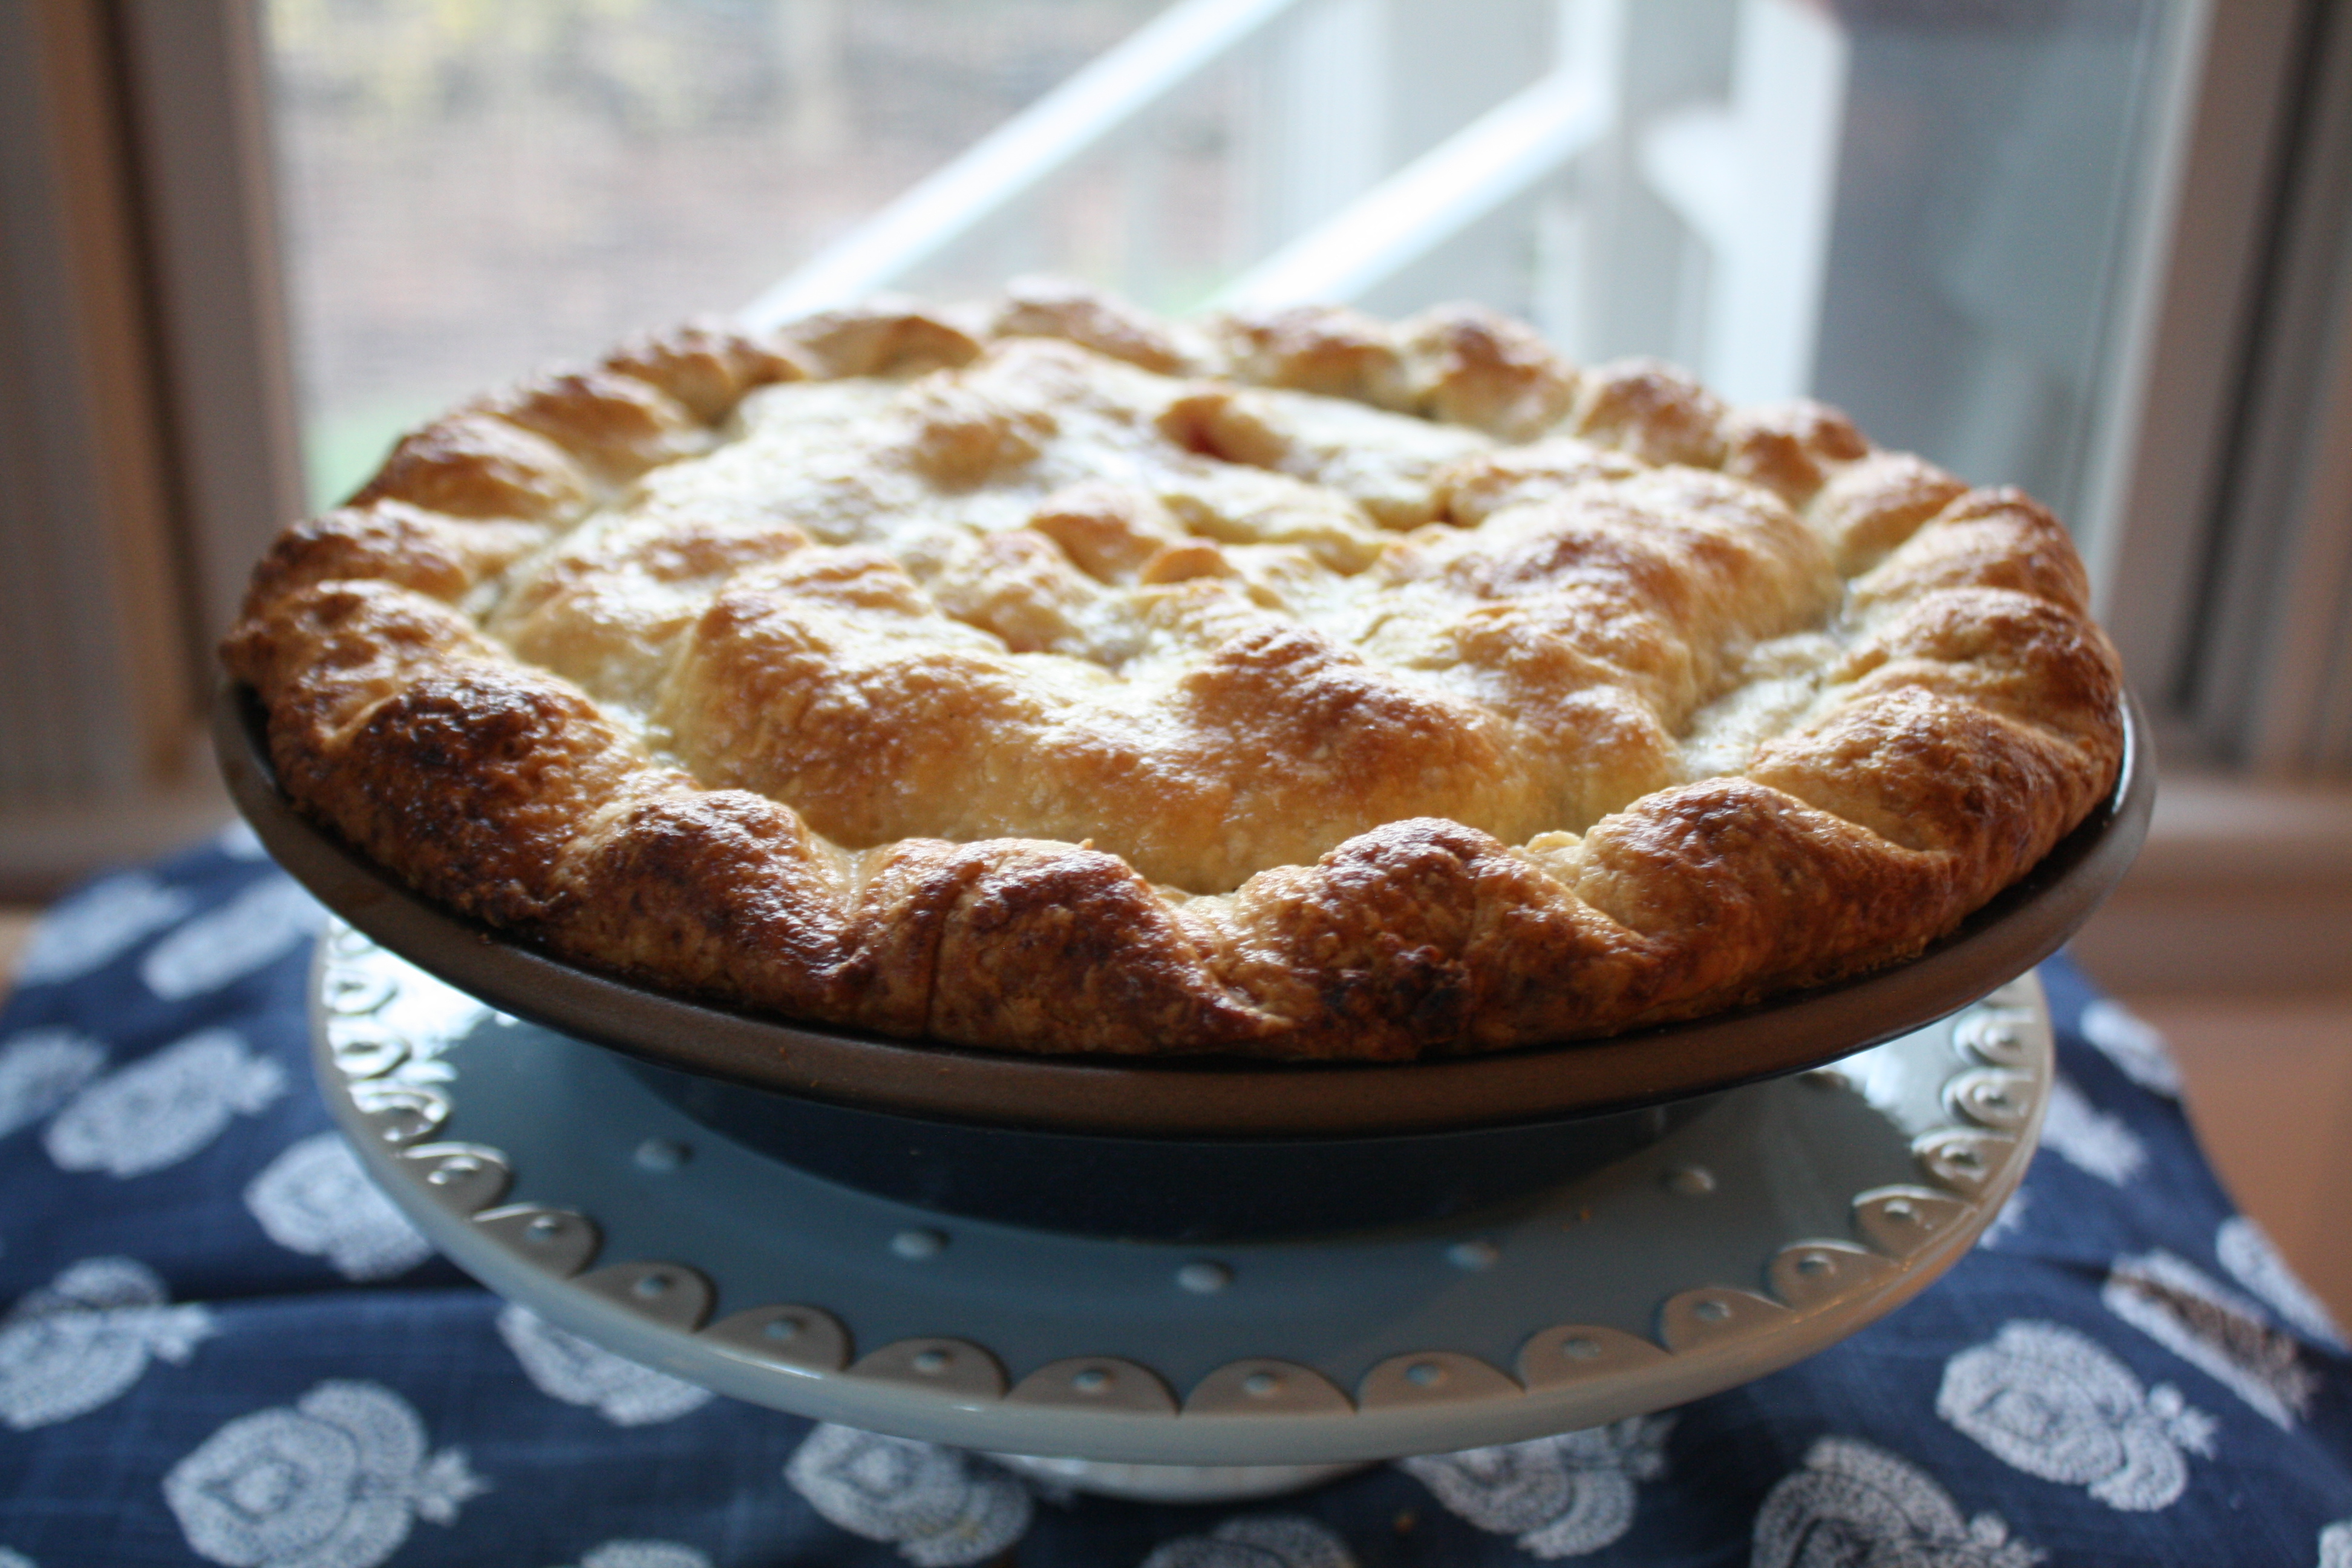 How to Make Rhubarb Pie | A Favorite Early Spring Dessert